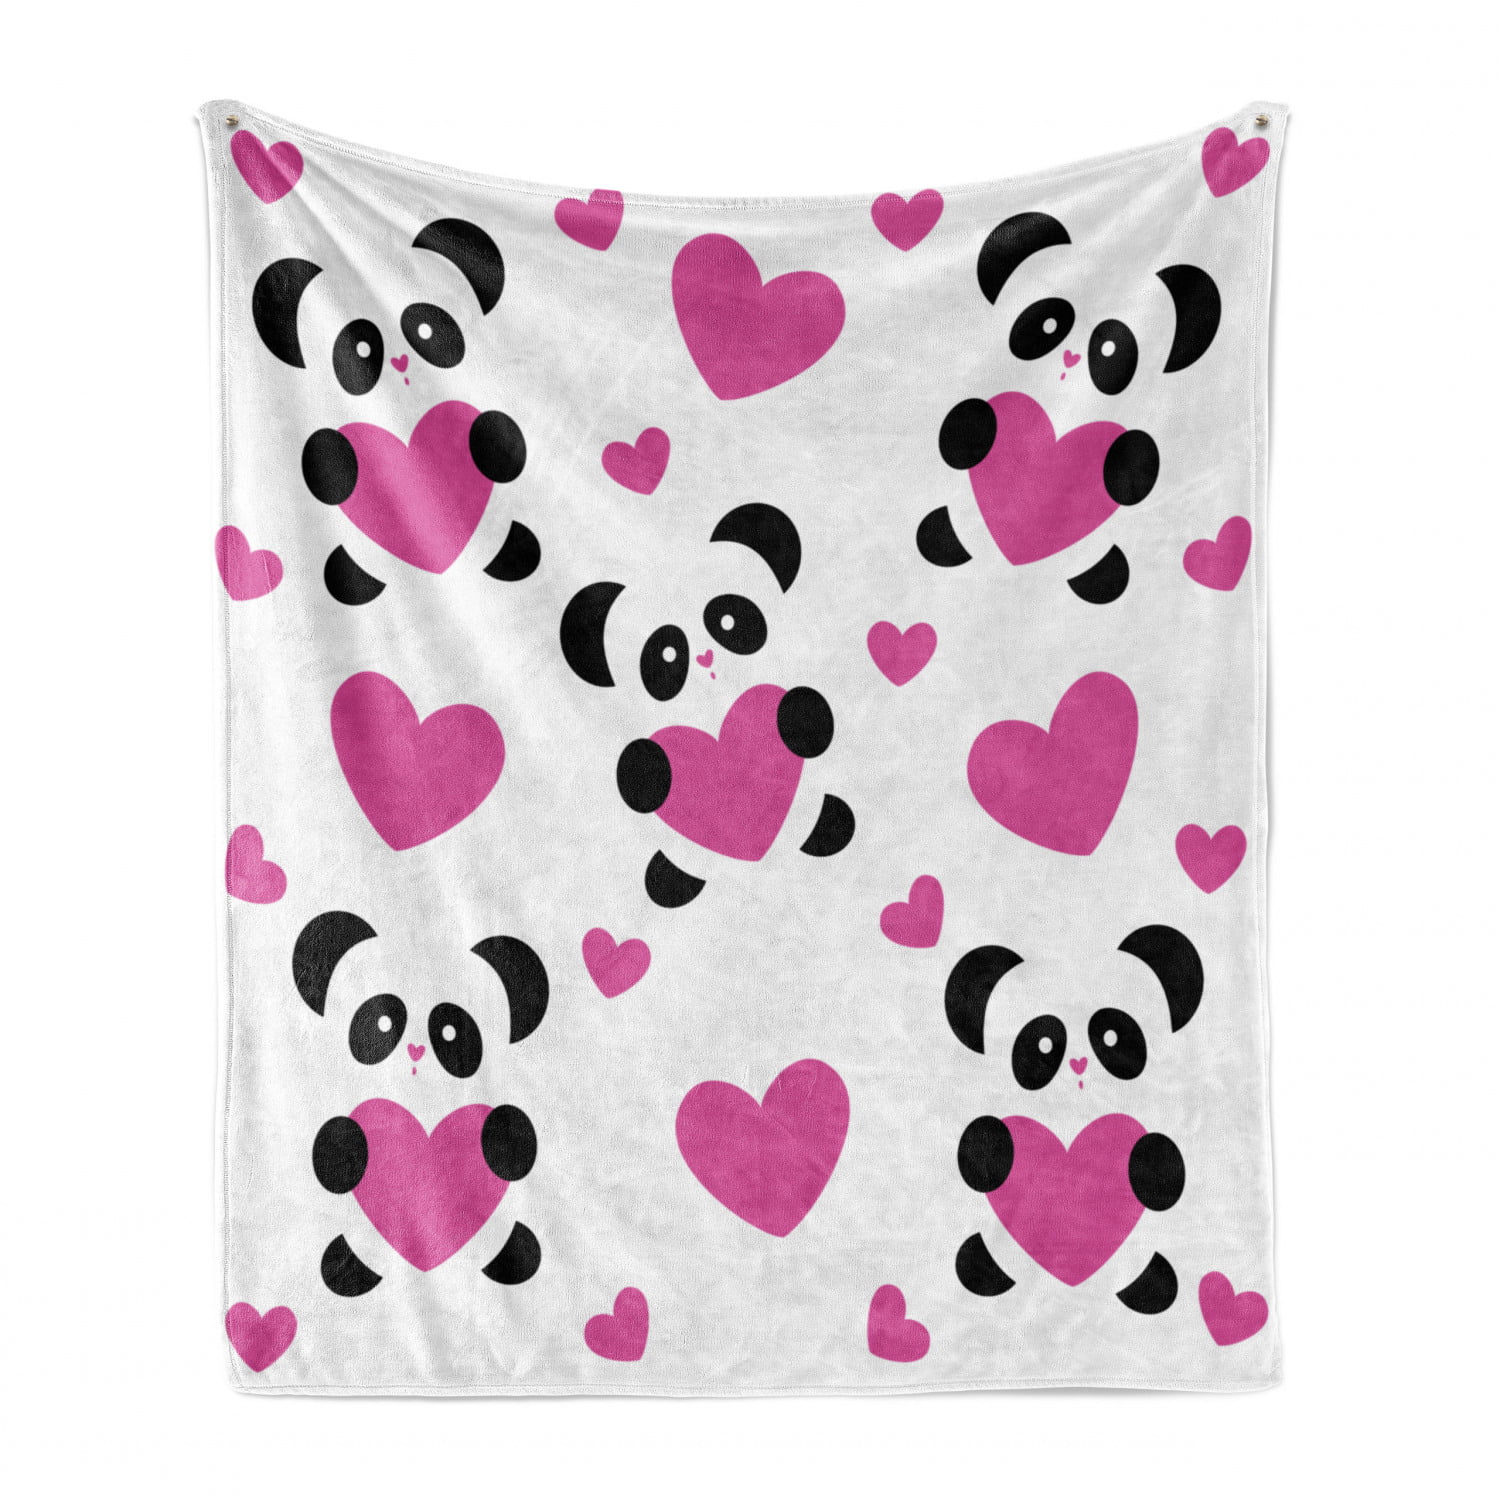 Love Soft Flannel Fleece Throw Blanket, Day of Love Pandas and Hearts  Cartoon Cheerful Wildlife Fun Art, Cozy Plush for Indoor and Outdoor Use,  50